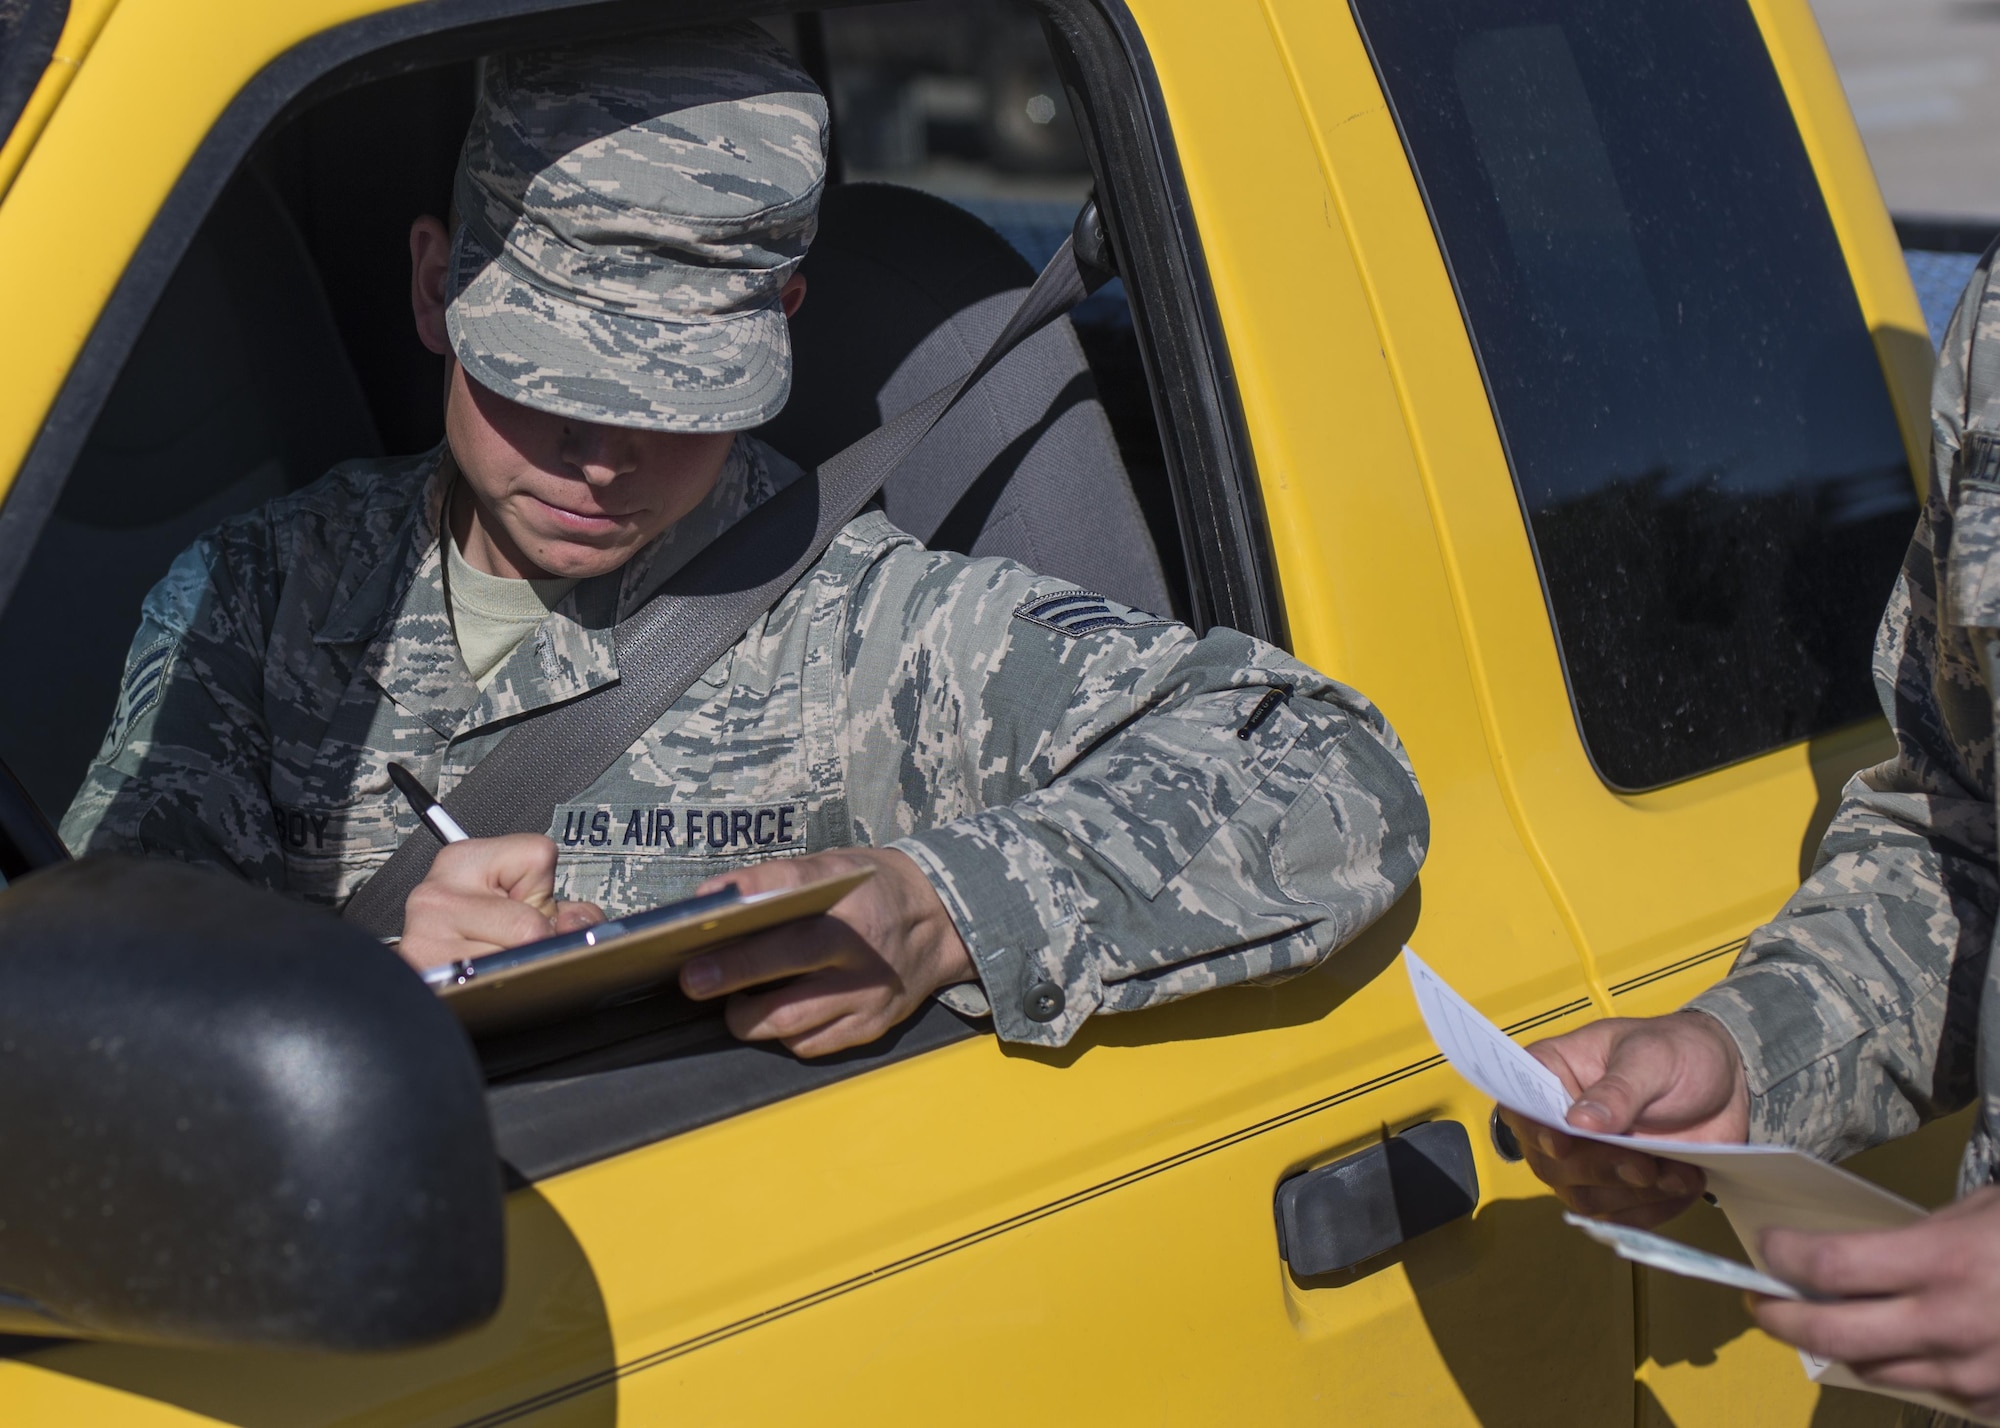 Senior Airman Bryce Bigboy, a 49th Material Maintenance Squadron metals technician, fills out a consent form during the 49th Medical Group’s Swab-Thru event, at Holloman Air Force Base, N.M. on April 20, 2017.  The Swab-Thru, coordinated with the “Salute to Life” program, is a special drive-thru bone marrow registration event. (U.S. Air Force photo by Airman 1st Class Alexis P. Docherty)